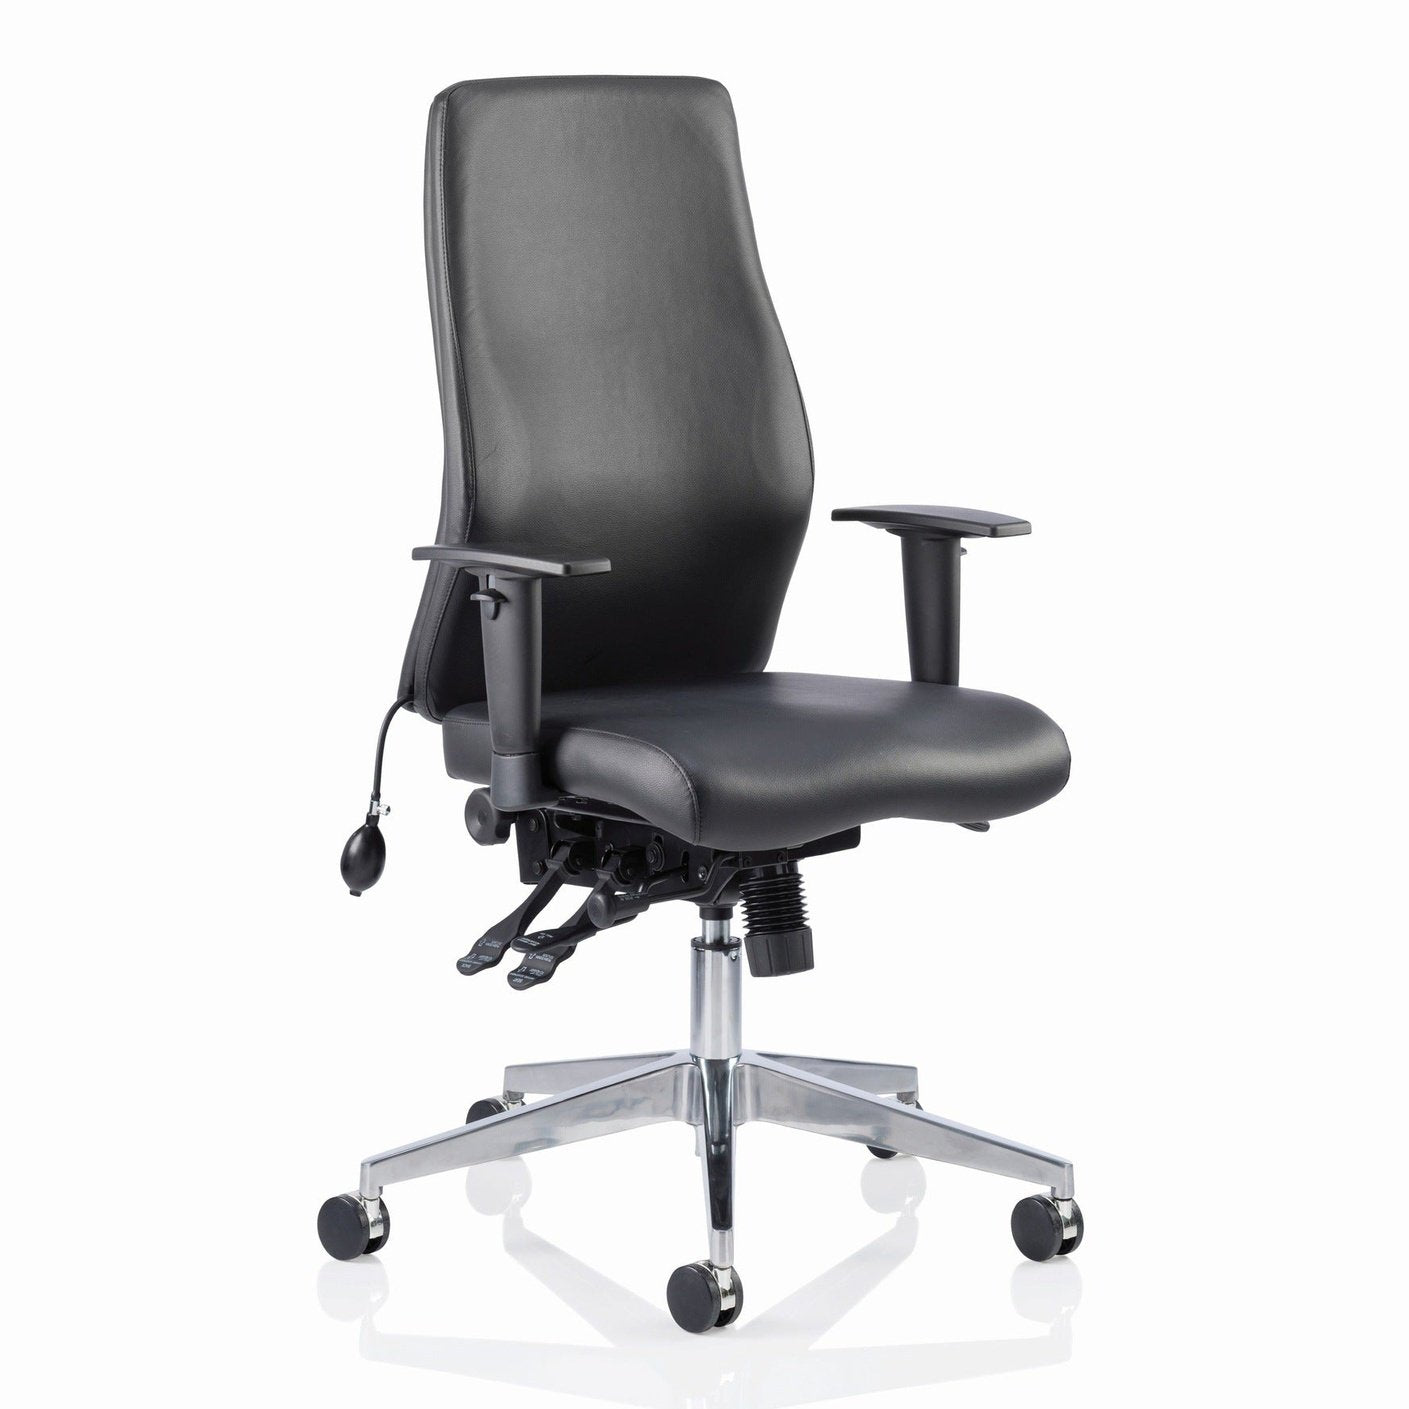 Onyx Ergonomic High Back Posture Chair - Height Adjustable Arms & Headrest, 24hr Use, 135kg Capacity, 5-Year Guarantee